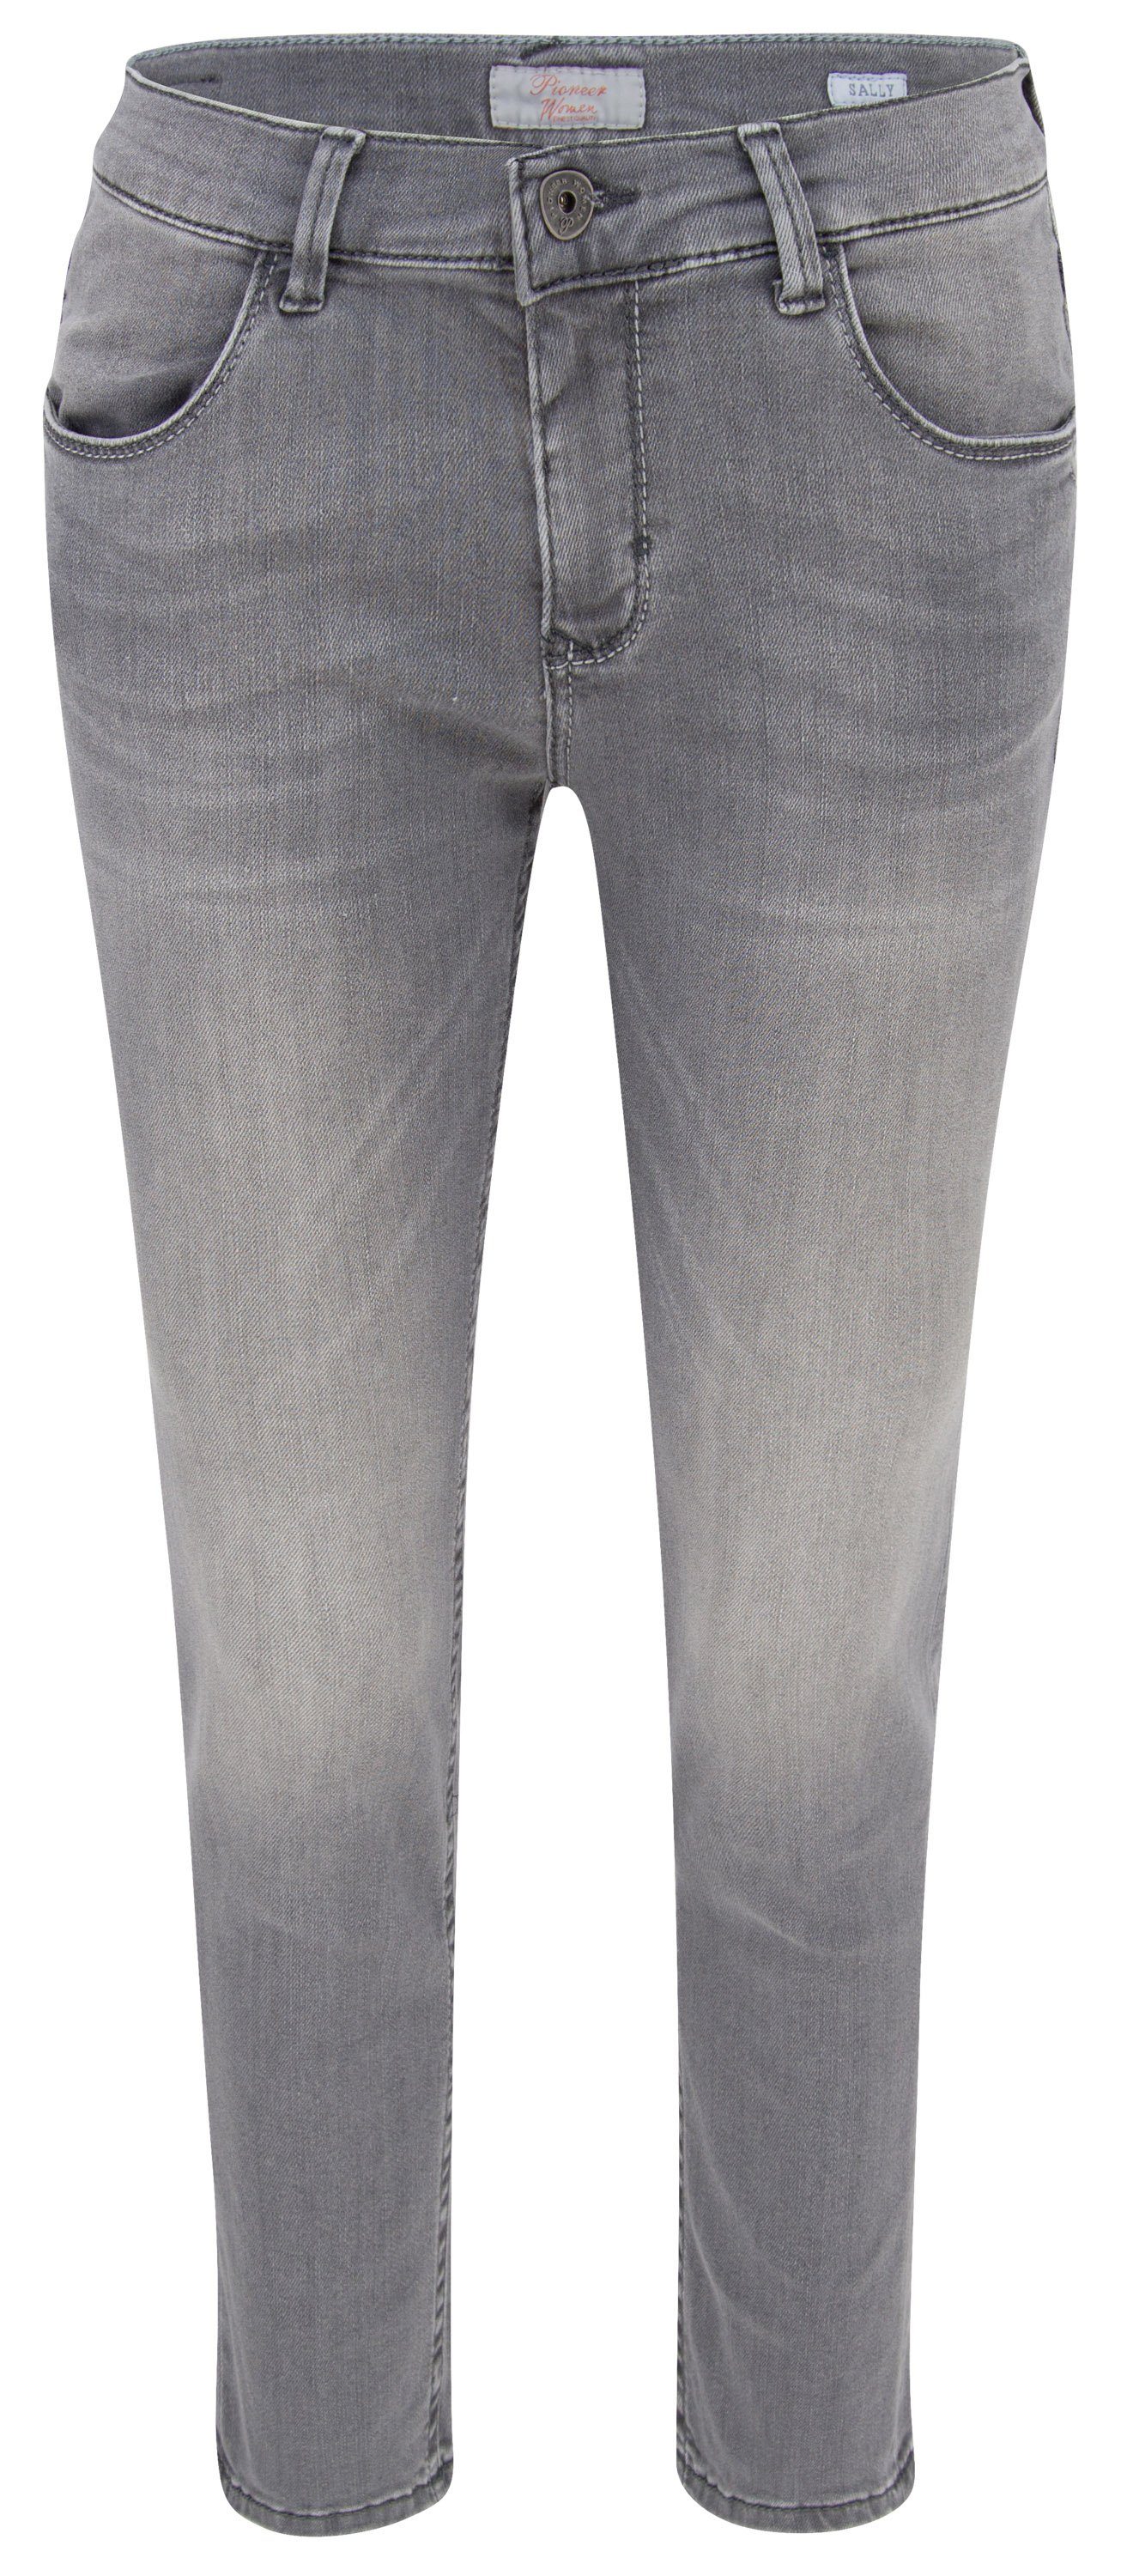 PIONEER used Authentic 5012.9834 SALLY POWERSTRETCH - Jeans grey 3290 Pioneer Stretch-Jeans